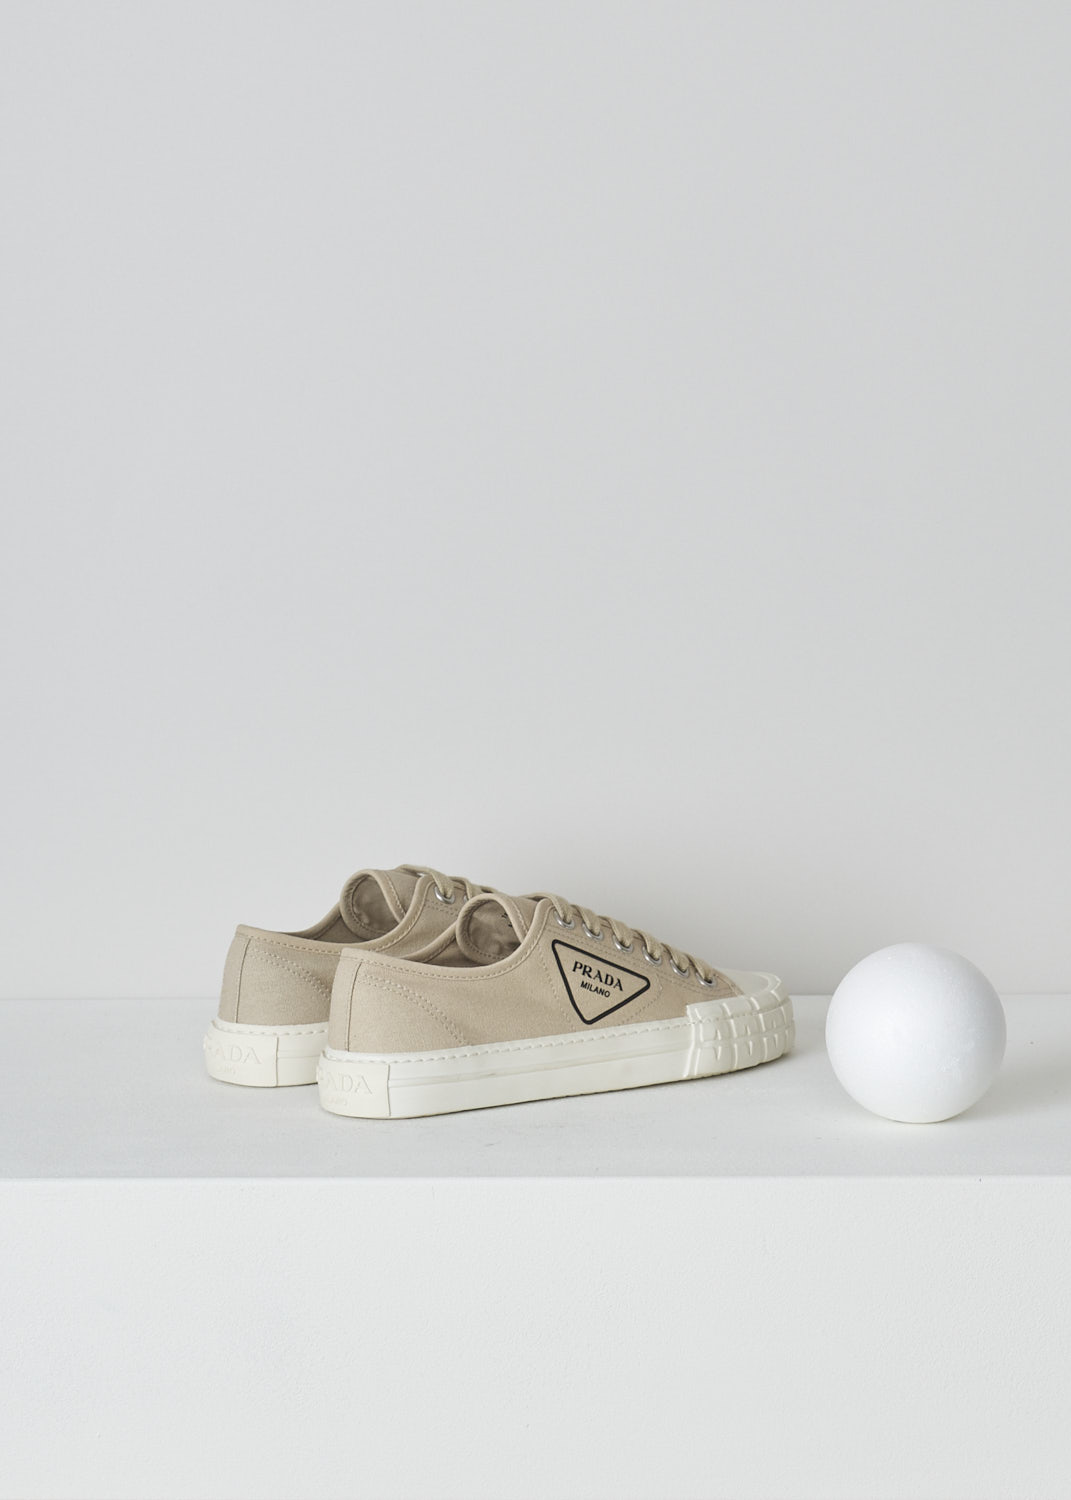 PRADA, BEIGE LOW TOP CANVAS SNEAKERS, 1E231M_2OFZ_F0065_CORDA, Beige, Back, These low top beige canvas sneakers feature a front lace-up fastening with laces in the same beige color. The brand's triangle logo can be found on the side in black rubber. These sneakers have a round toe with a white rubber toe cap and ribbed rubber soles. 
